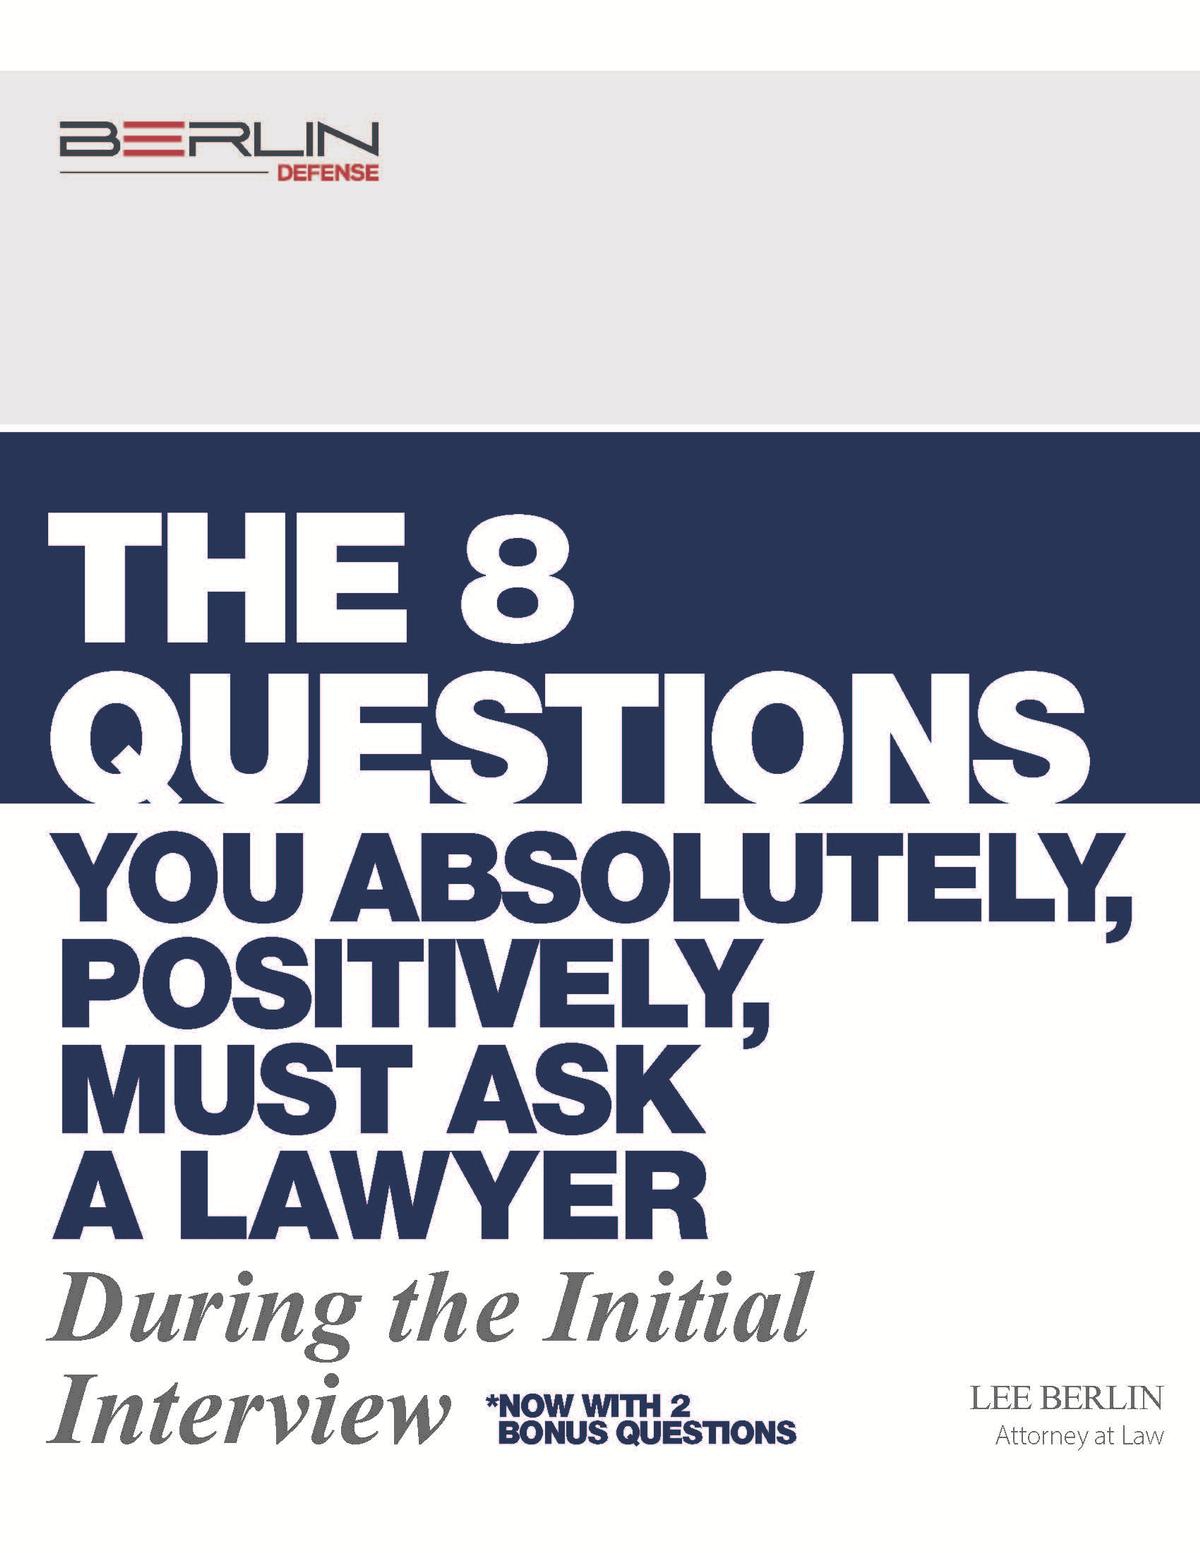 TOP 8 QUESTIONS YOU ABSOLUTELY, POSITIVELY, MUST ASK A LAWYER